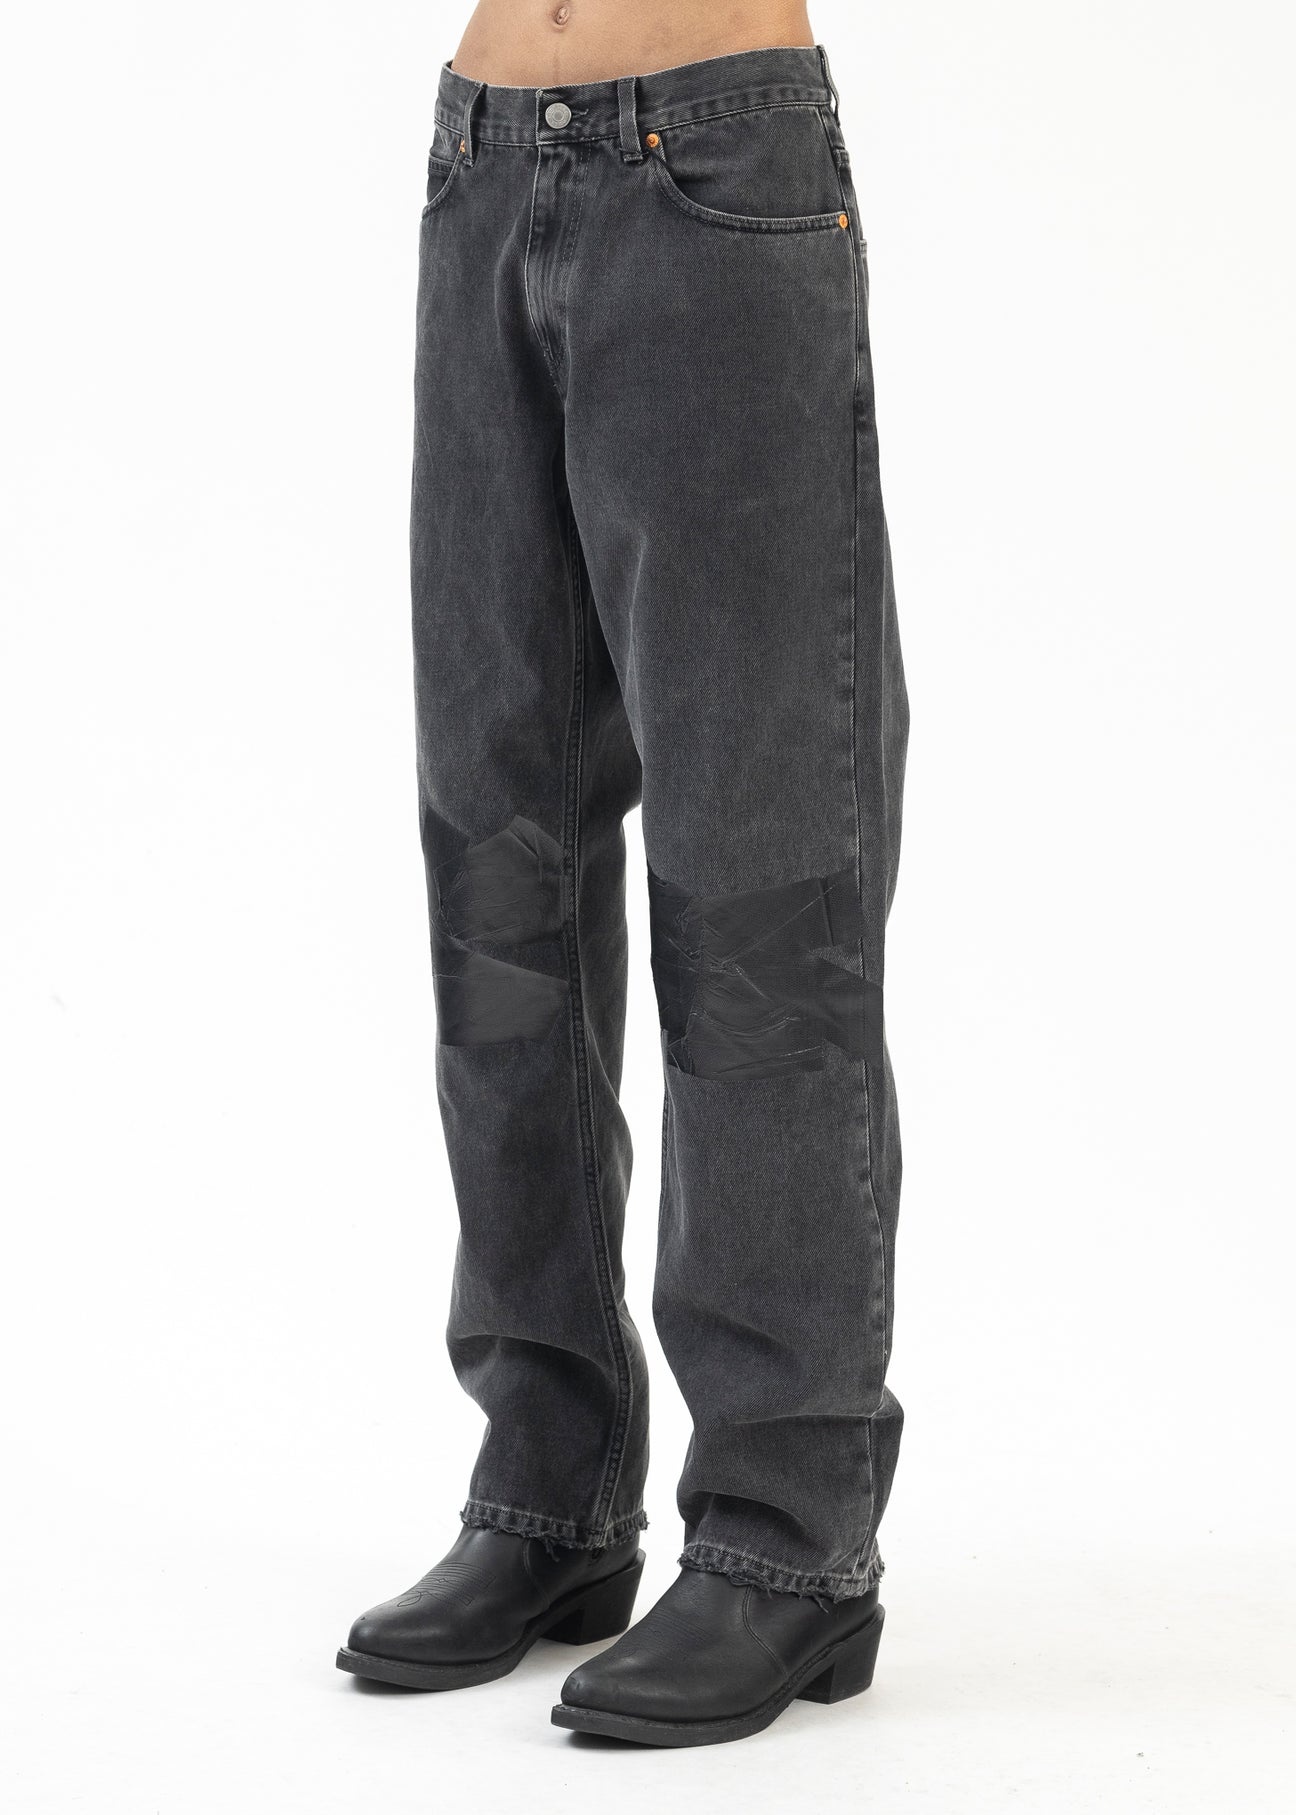 BLACK WASH / GAFFER TAPE RELAXED FIT JEAN - 2